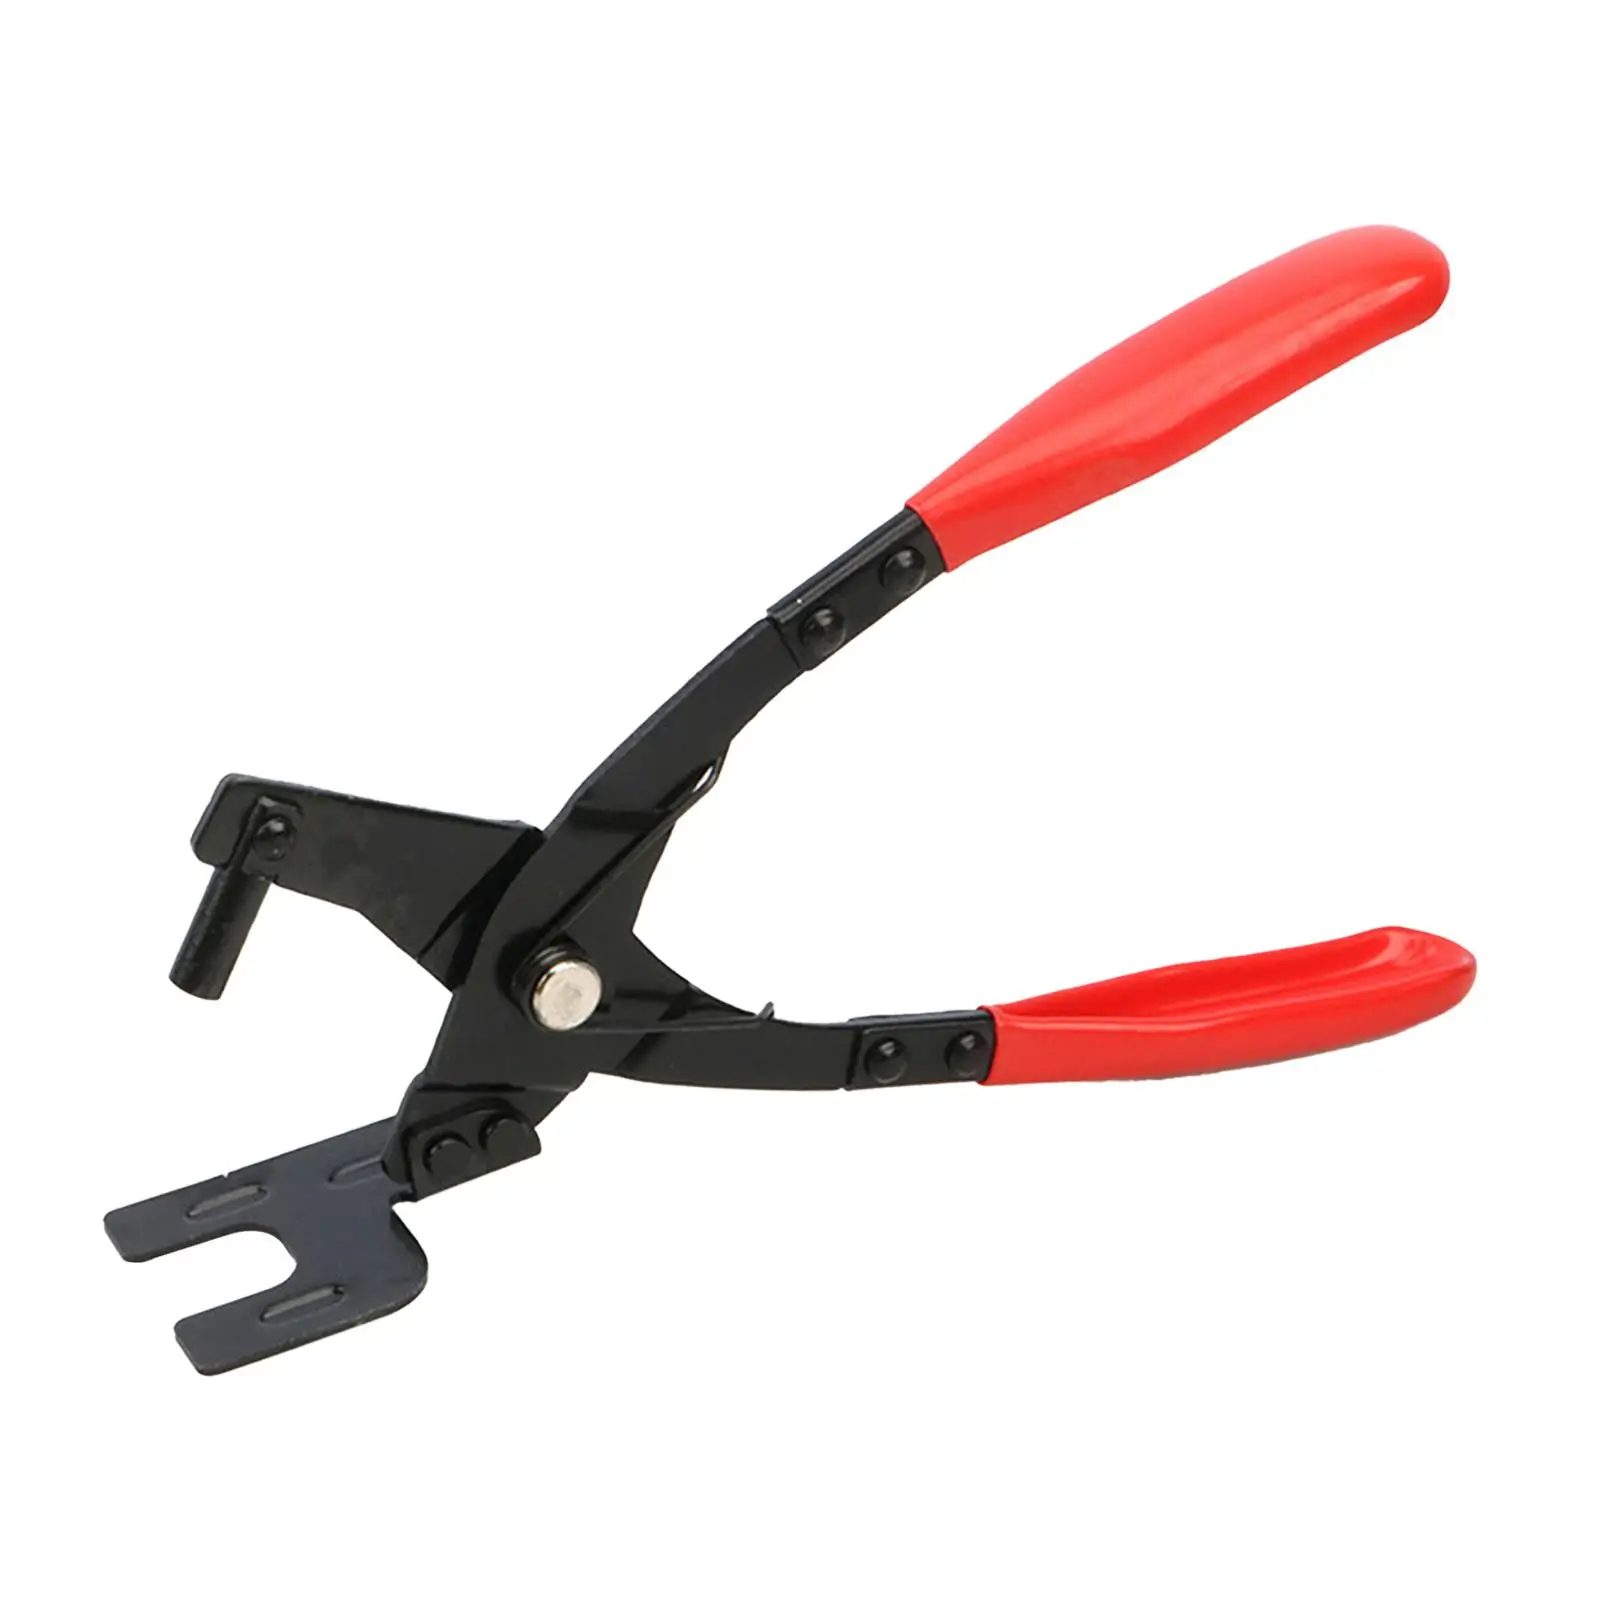 Car Exhaust Hanger Removal Pliers Anti Slip Exhaust Grommet Pulling Pliers Compatible with All Exhaust Rubber Hangers Red